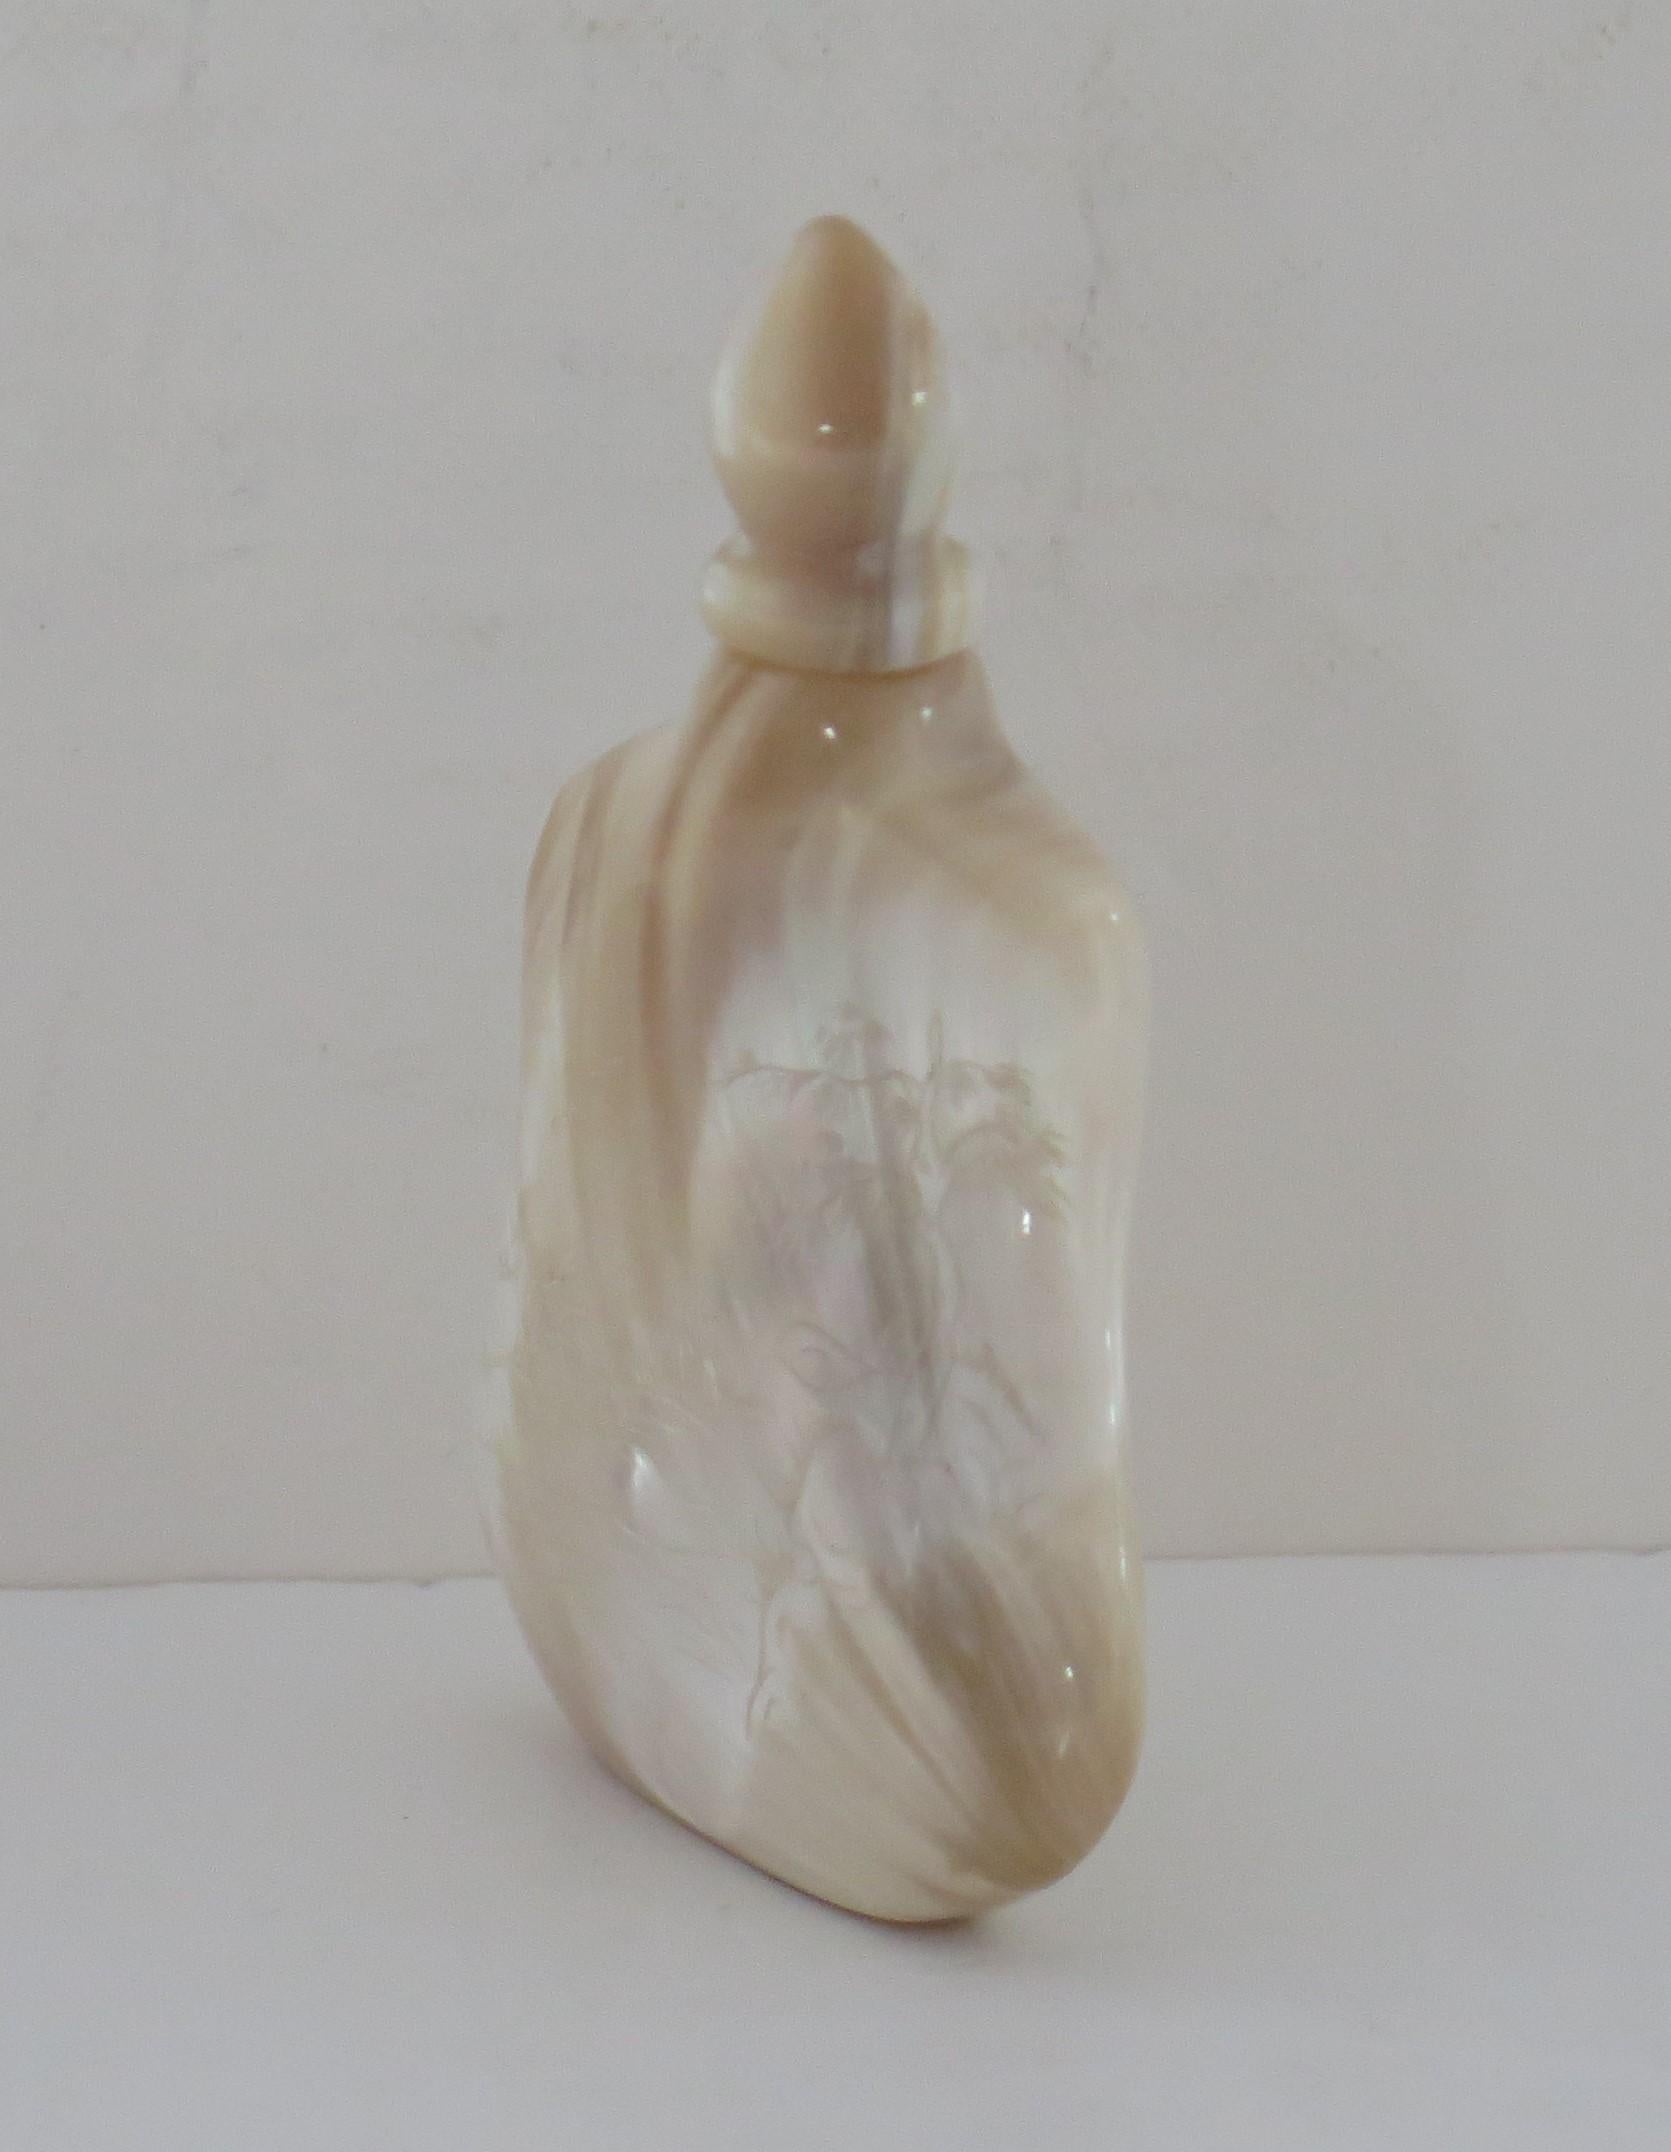 20th Century Chinese Export Snuff Bottle of Natural Agate Stone Spoon Top, circa 1930 For Sale